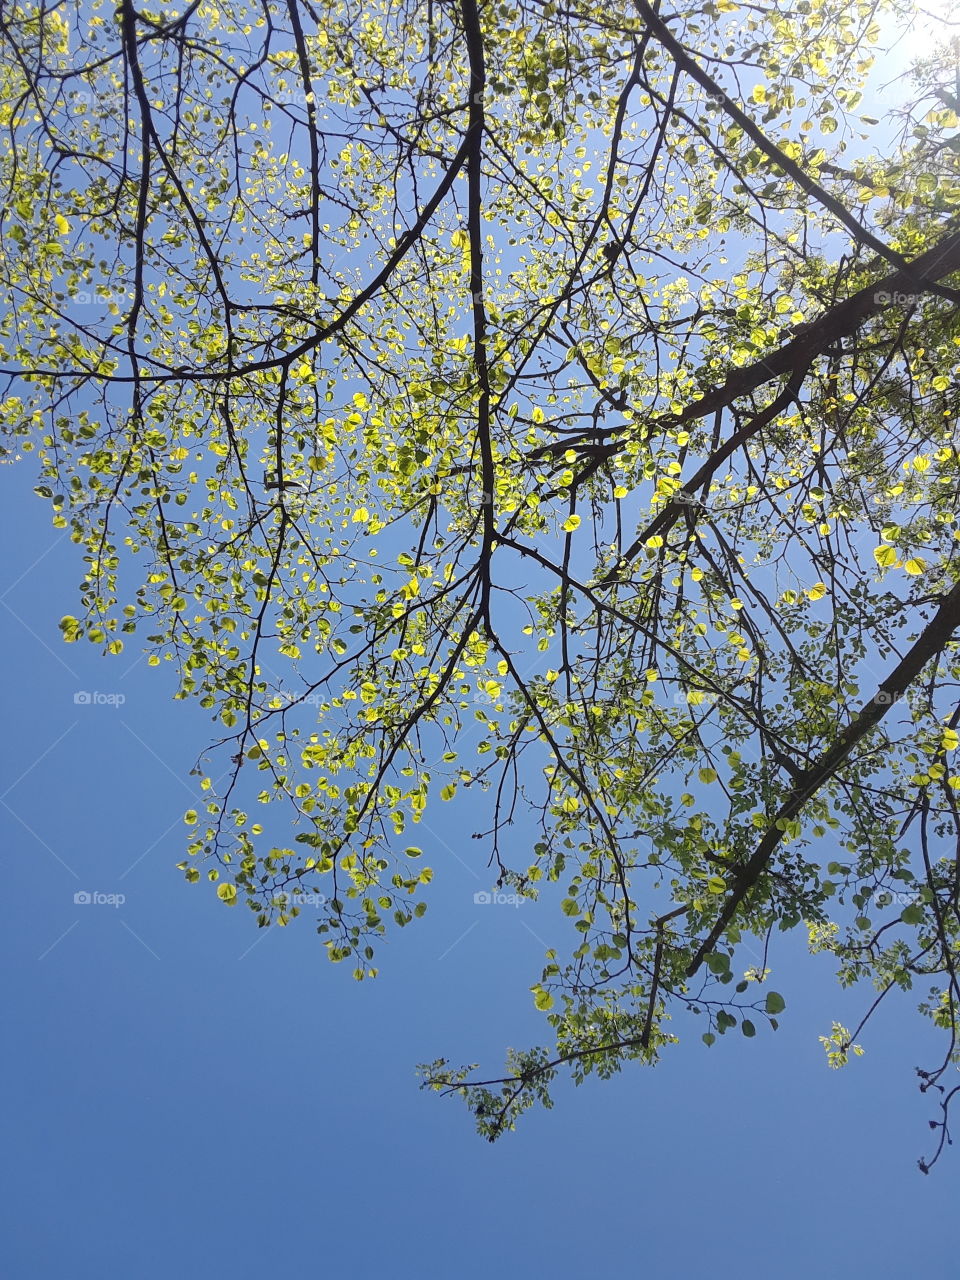 Clear skies through budding branches.